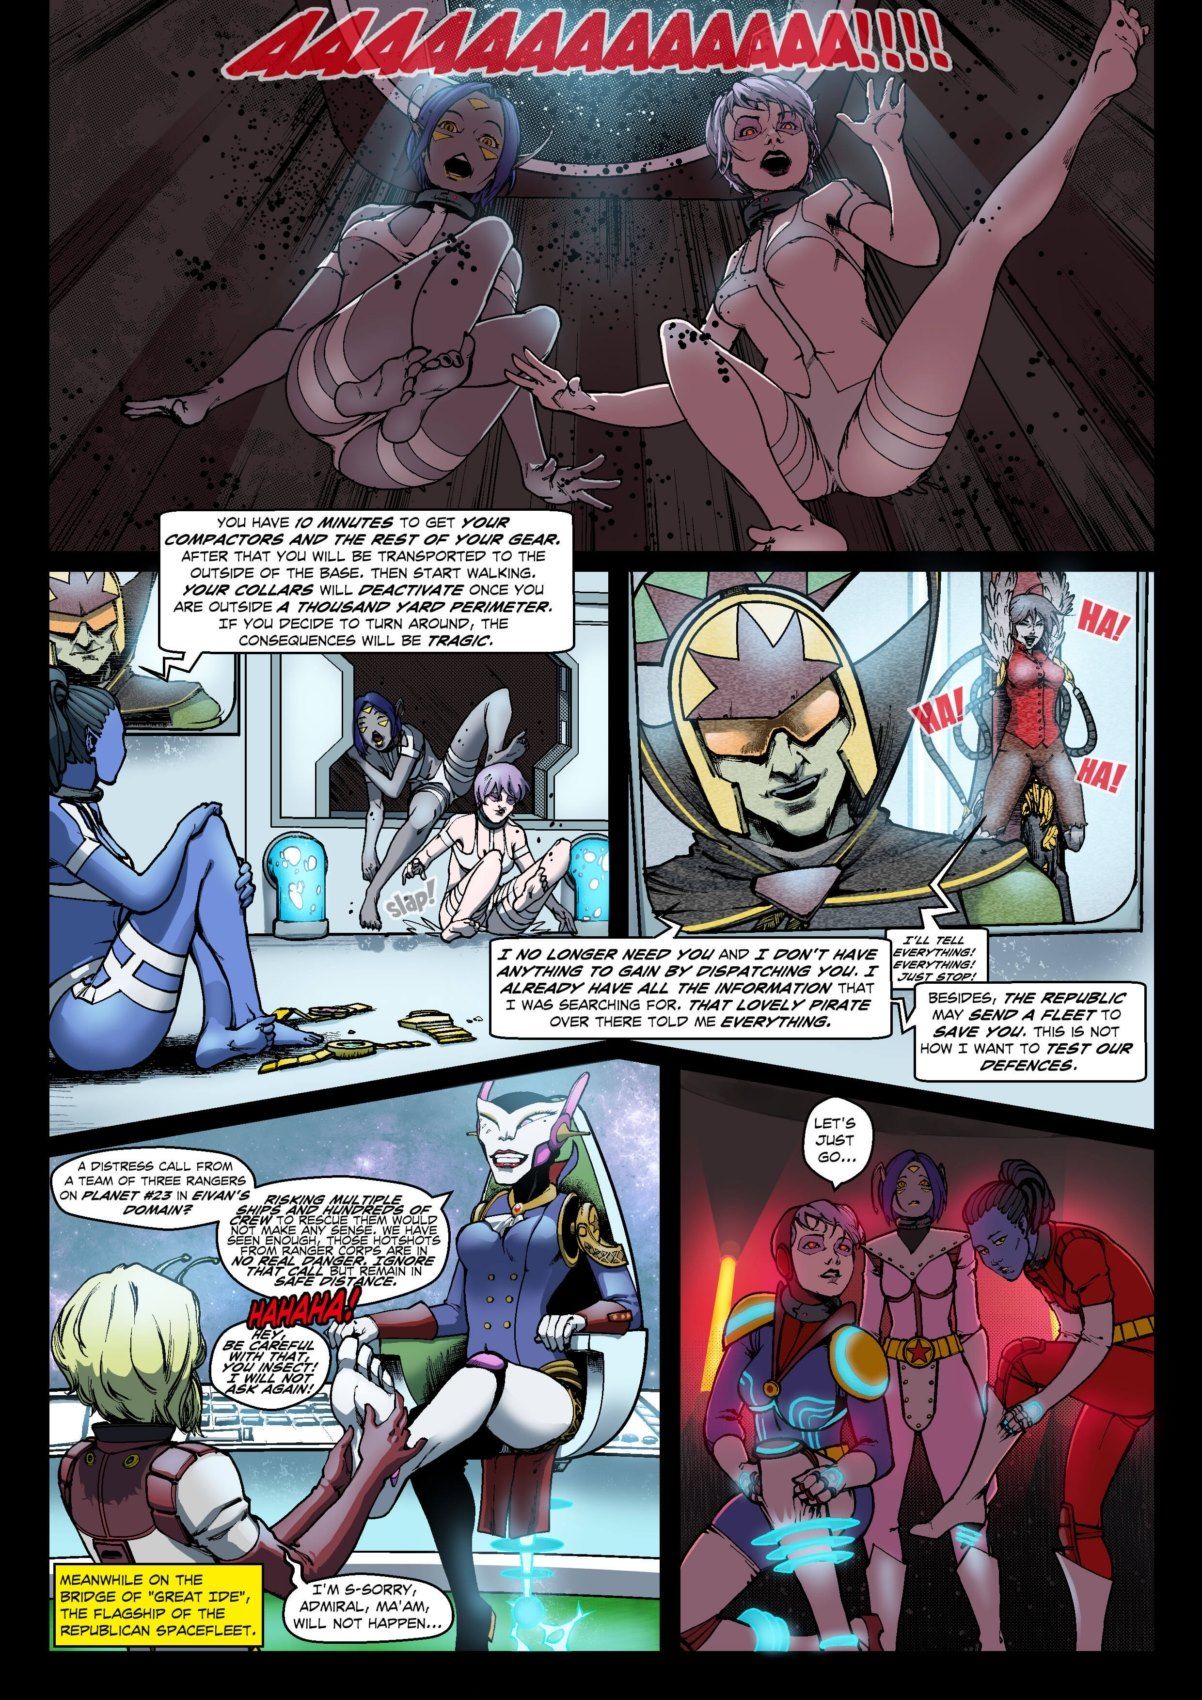 Adventures of the Brave Rangers Issue 02 (PawFeather) page 8